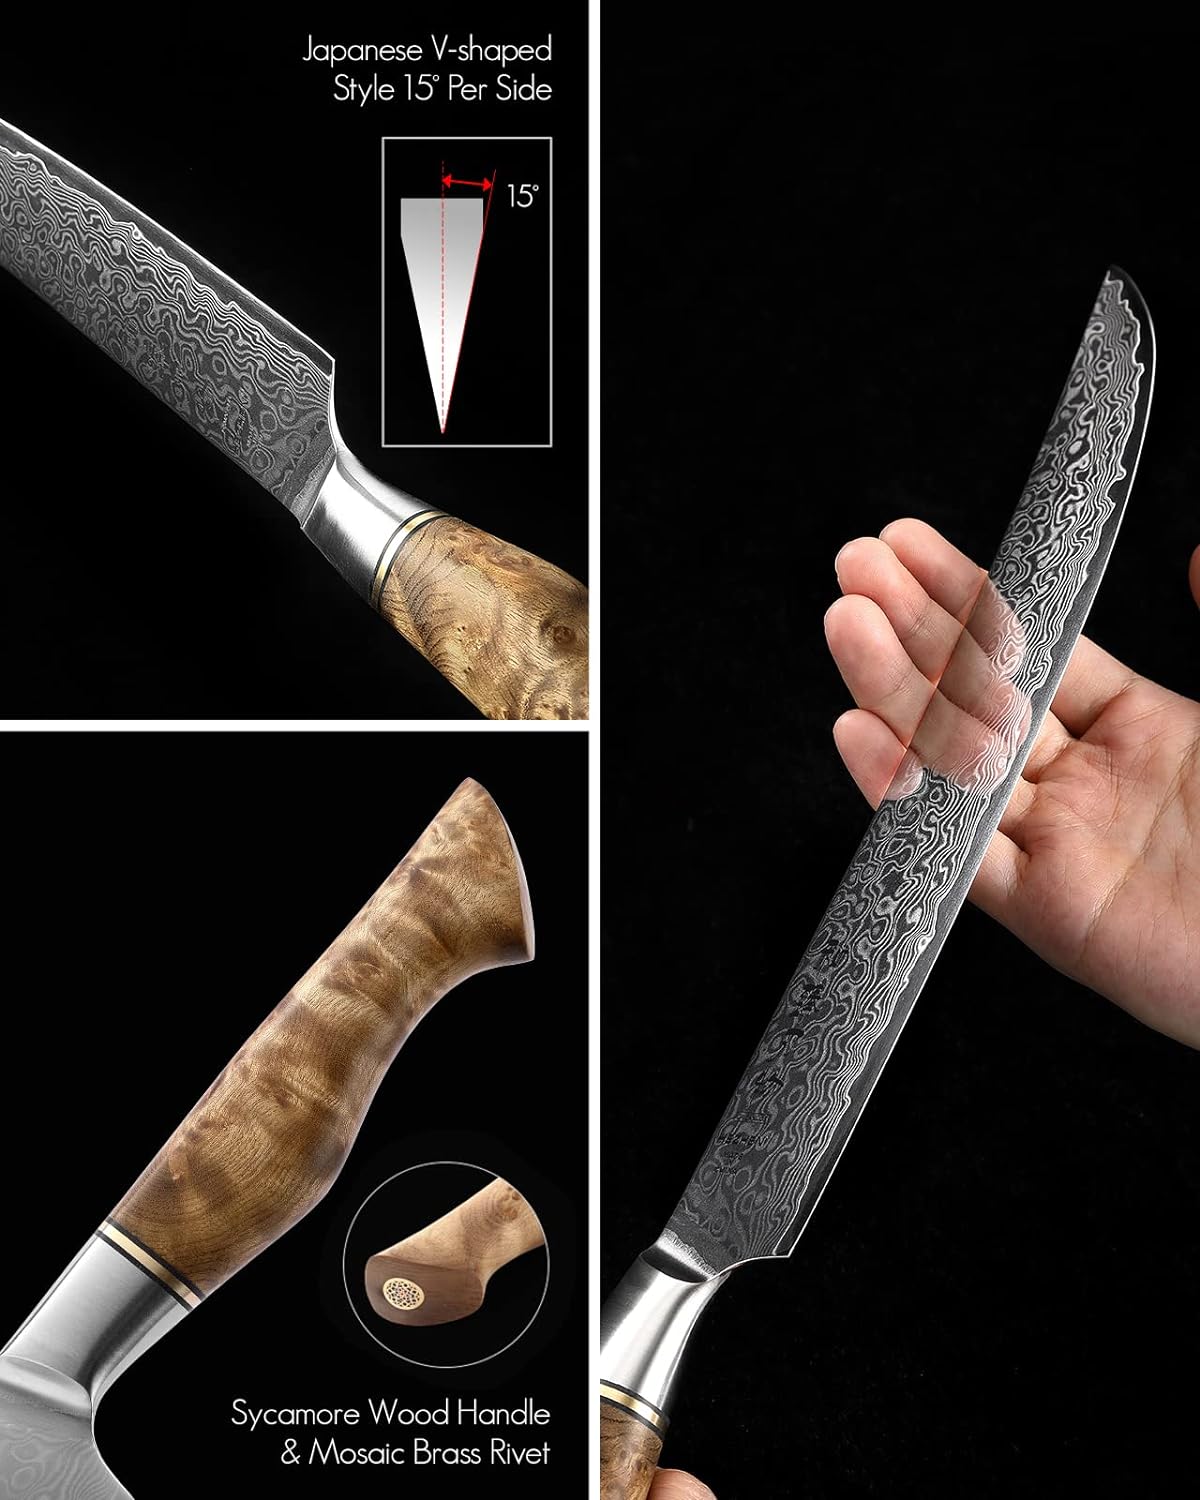 HEZHEN 7 inch Nakiri Knife Japanese High Carbon Steel-Super Durable Cooking Knife-67 Layers of Damascus Steel Sharp Blade -Ergonomic Design for Figured Sycamore Wood Handle in Master Serie